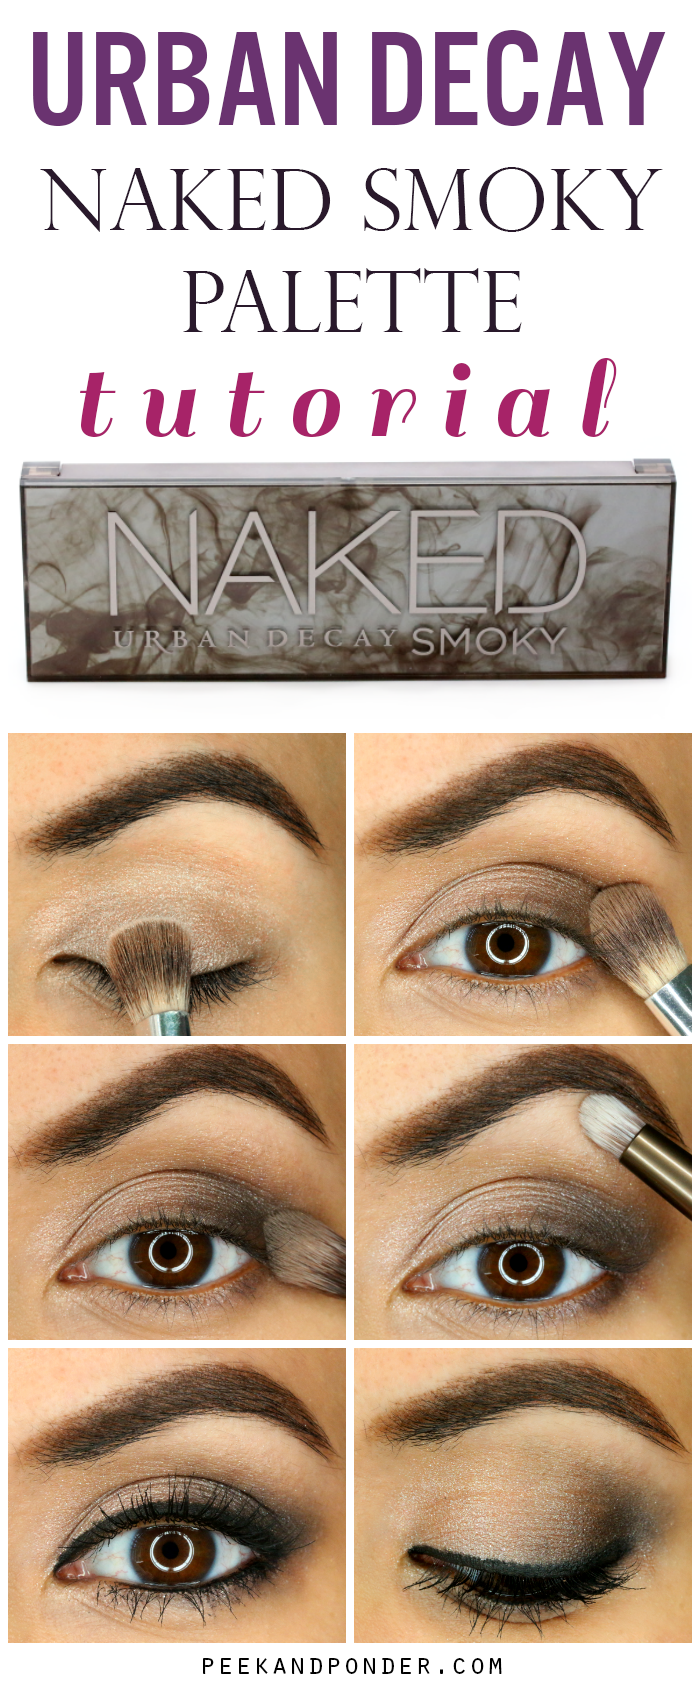 NEW Urban Decay Naked Smoky | Tutorial | Swatches - YouTube